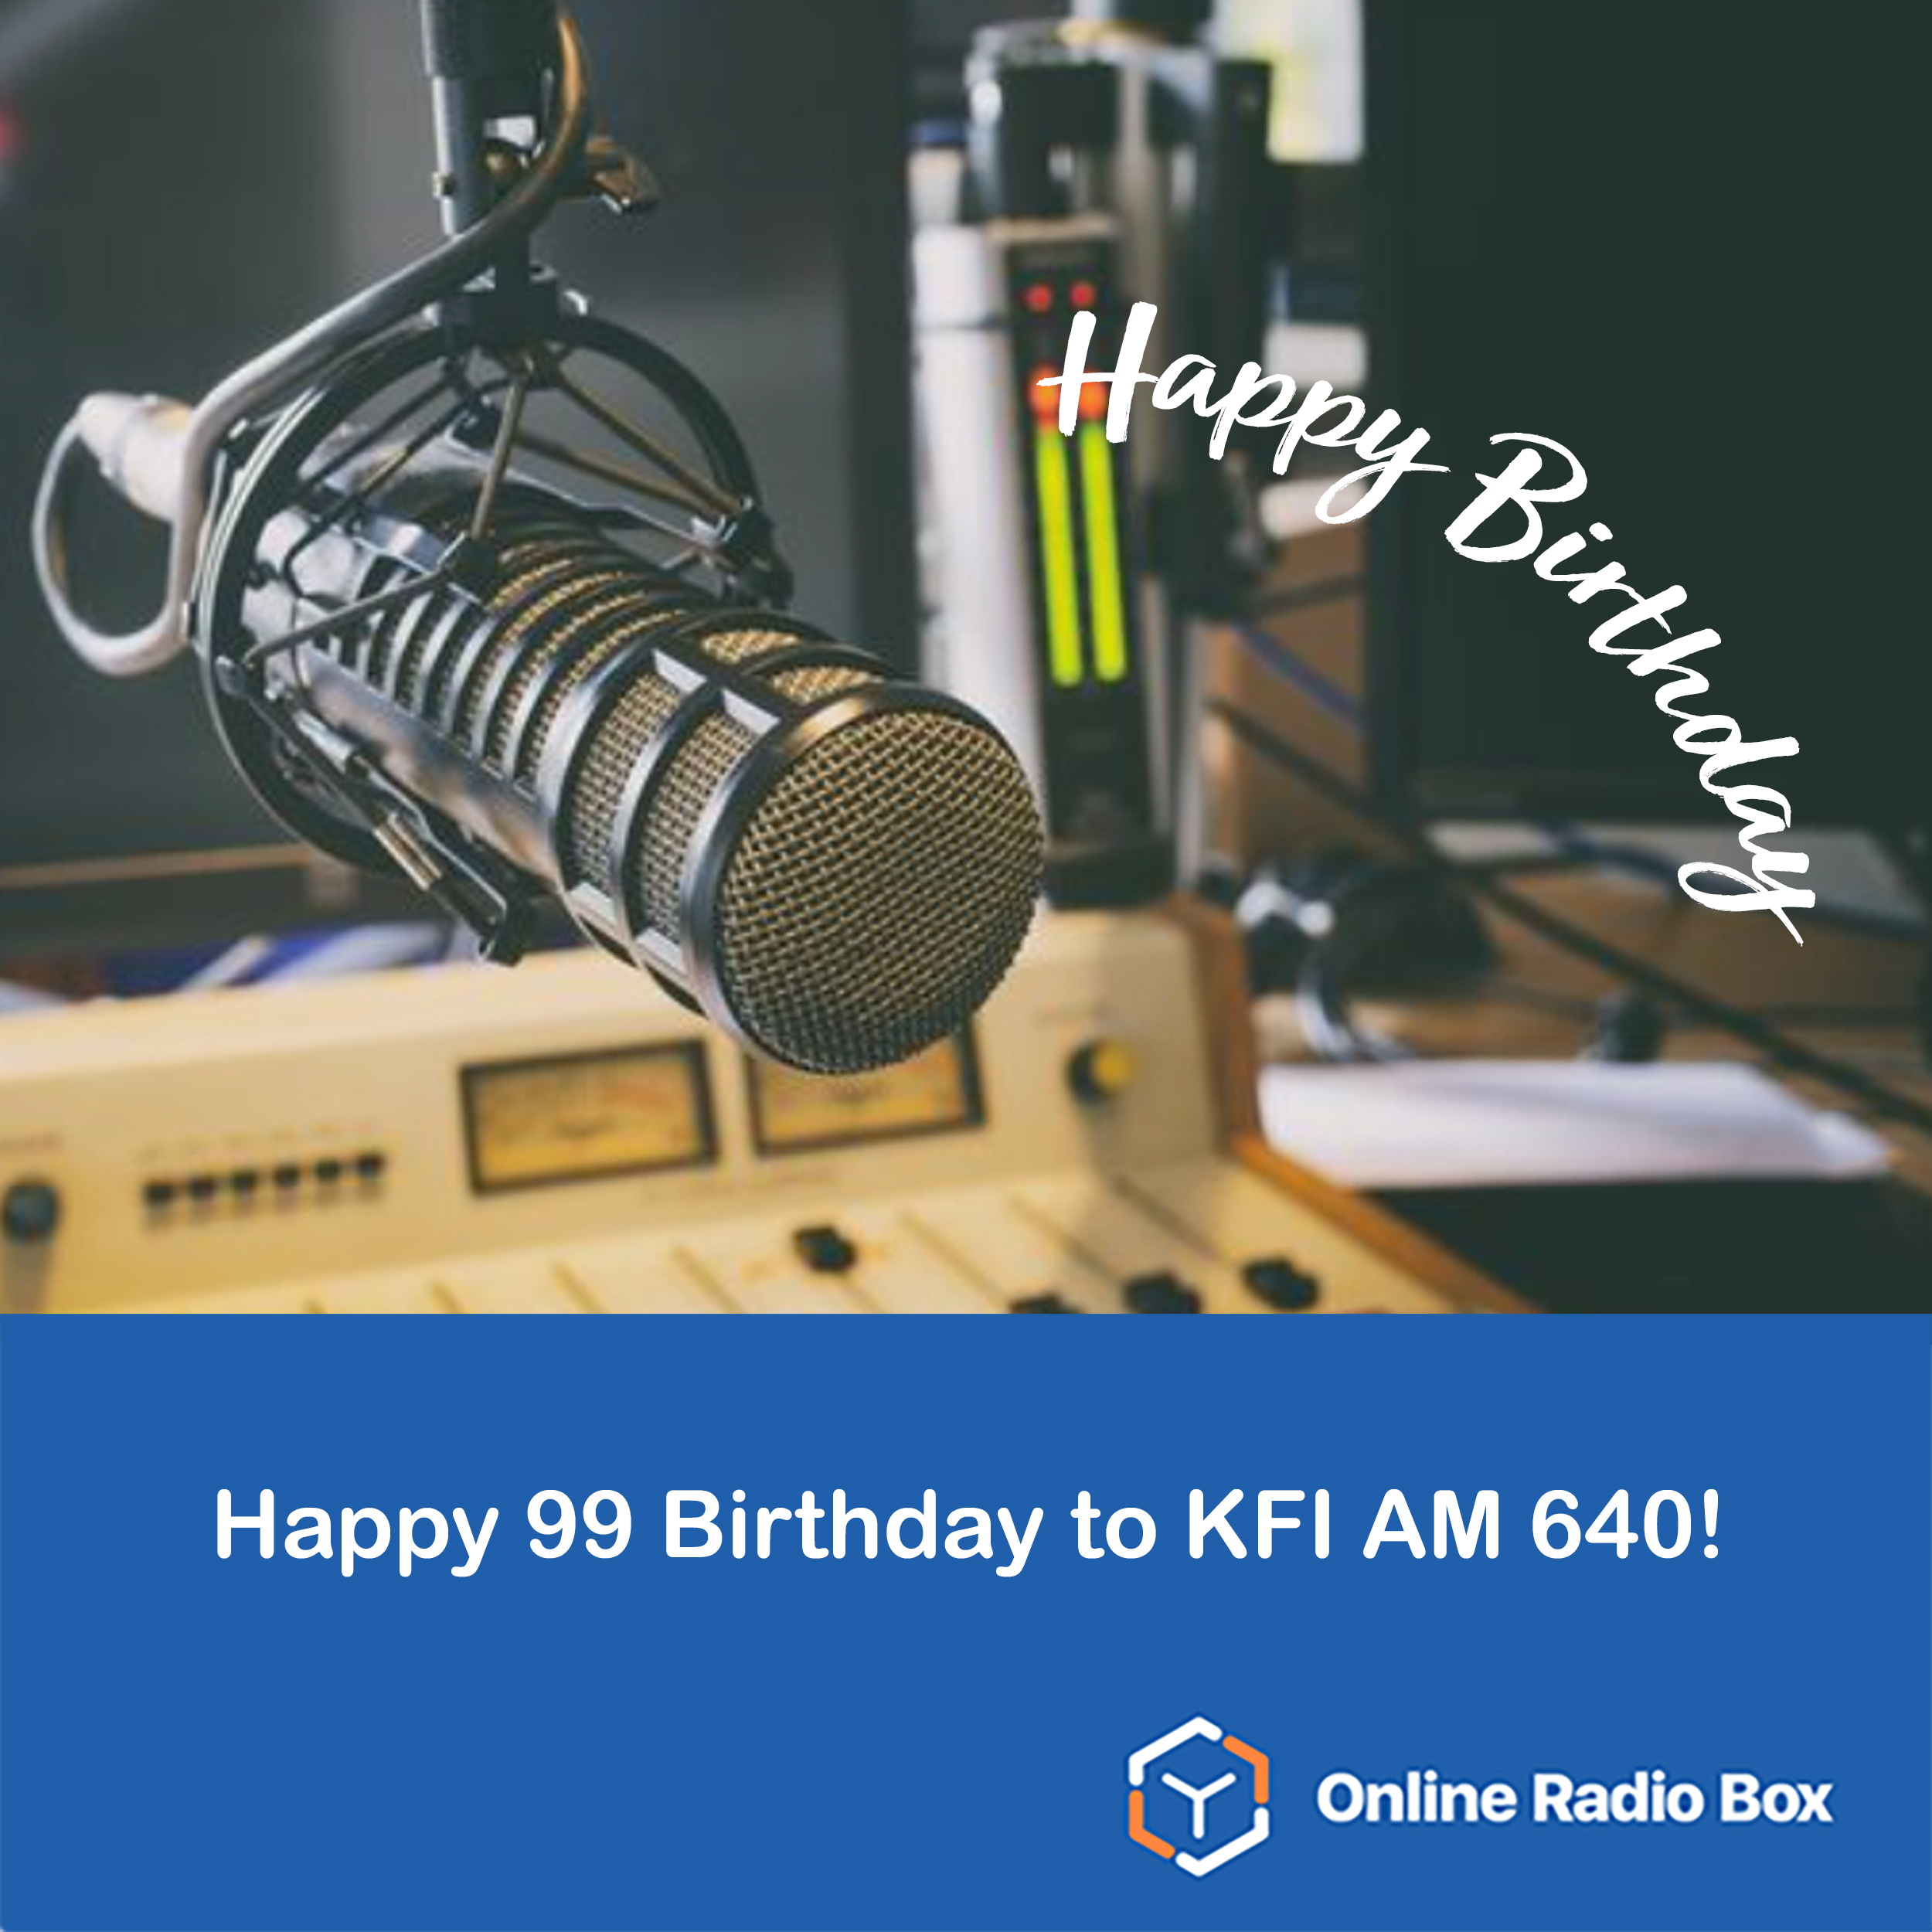 OnlineRadioBox on Twitter: "Happy #99Birthday to @KFIAM640! Best wishes  from Online Radio Box team! 💐🎂🍾 KFI AM 640 is the one of the most  popular radio stations in Los Angeles and most